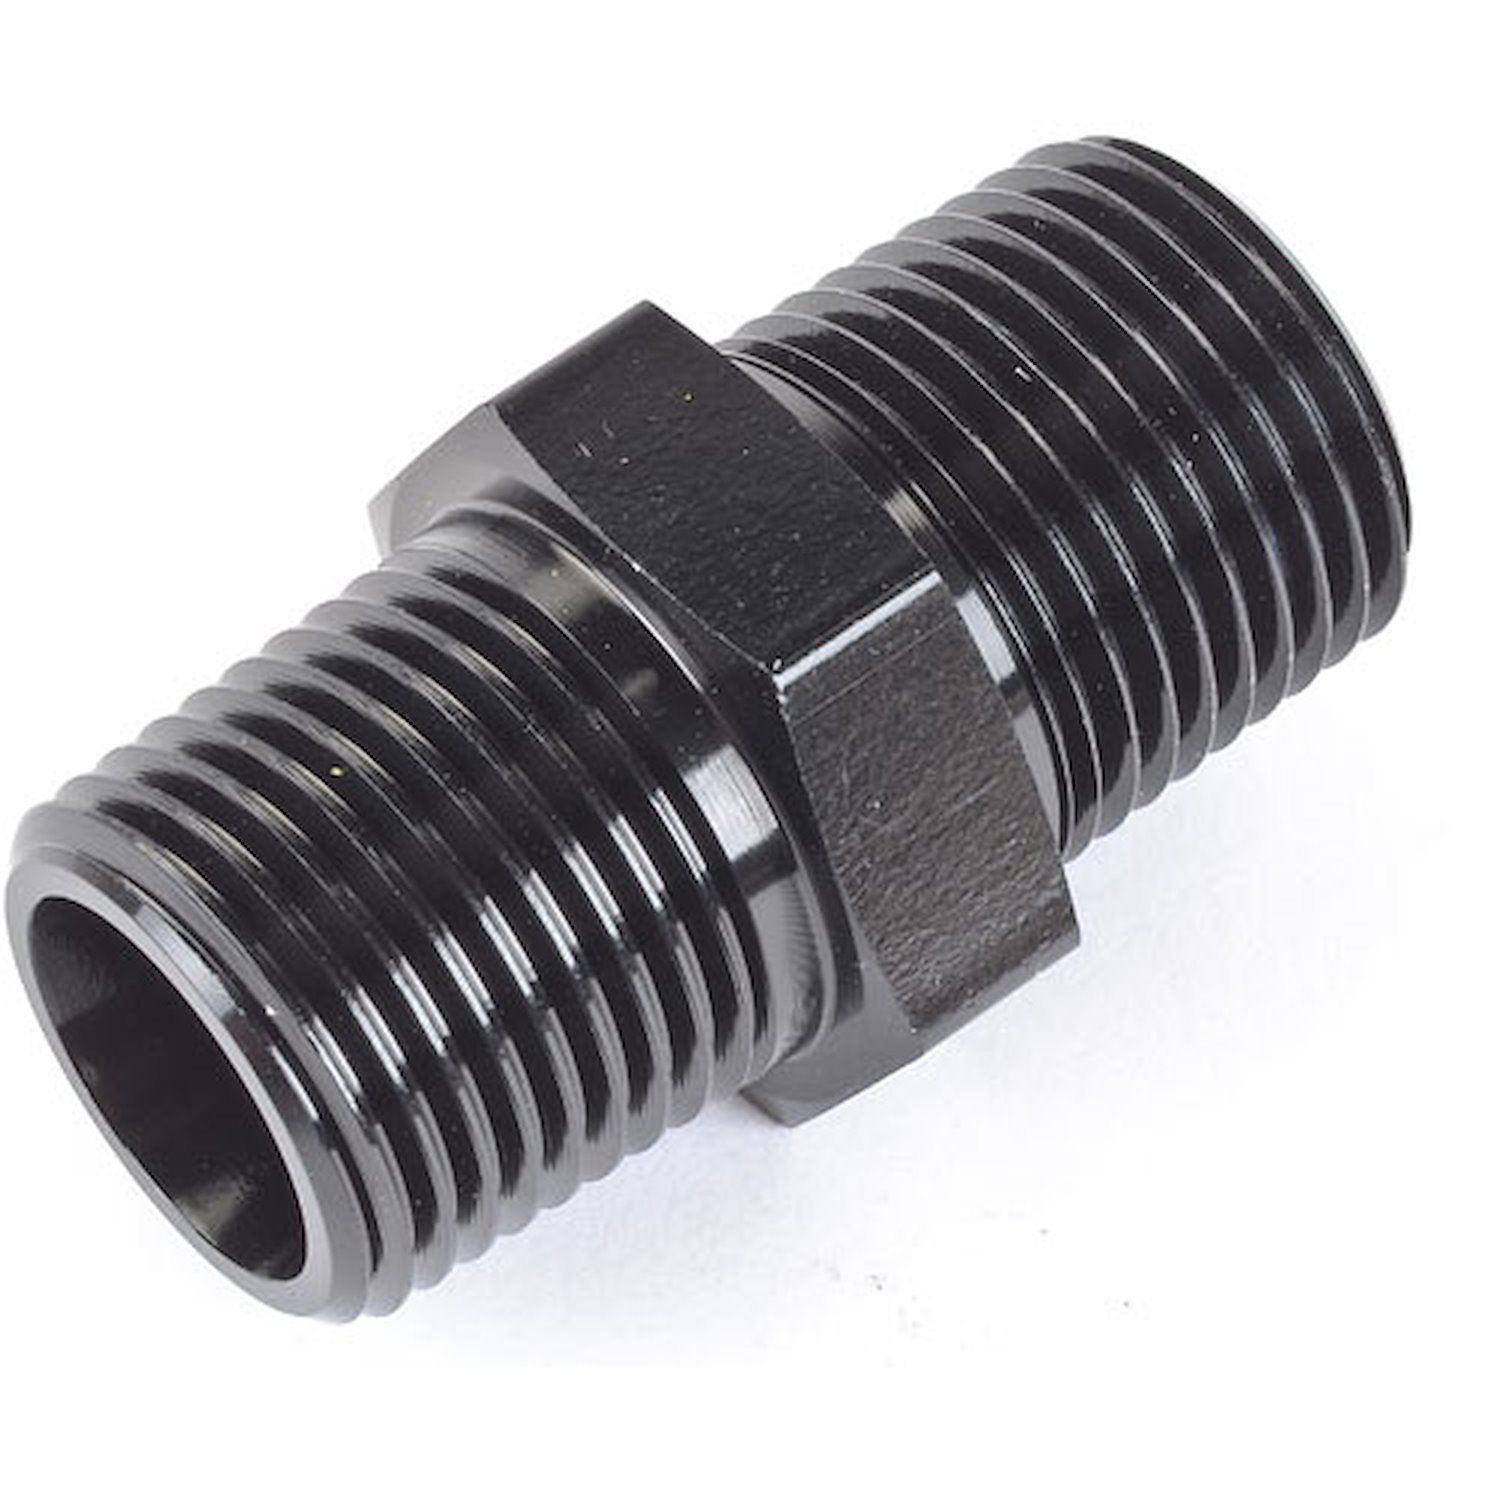 NPT to NPT Straight Union Fitting [1/2 in. NPT Male to 1/2 in. NPT Male, Black]